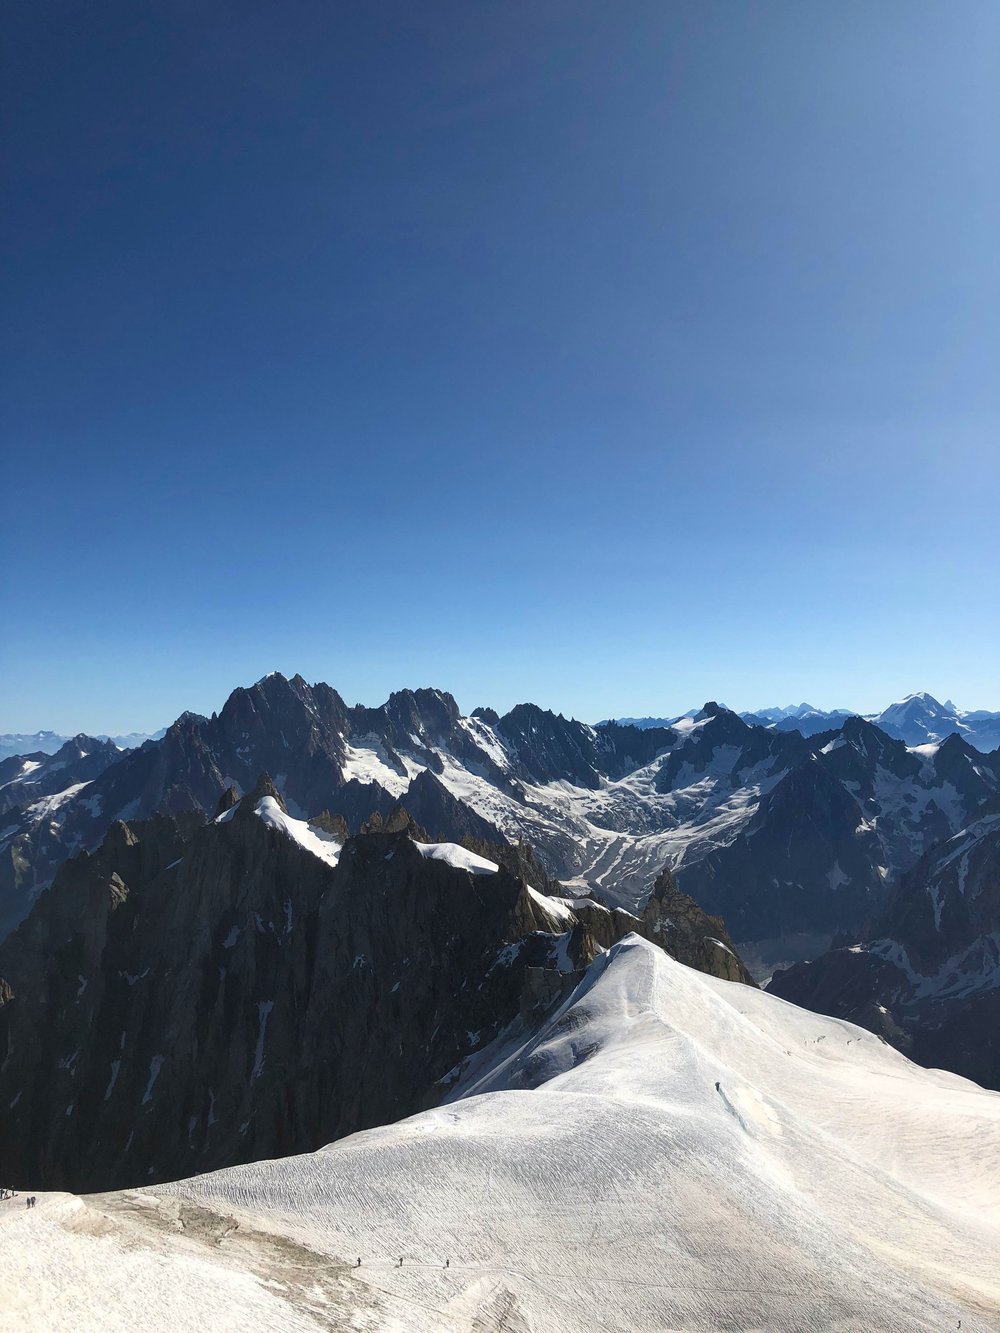  View of the range from Aiguille du Midi.  